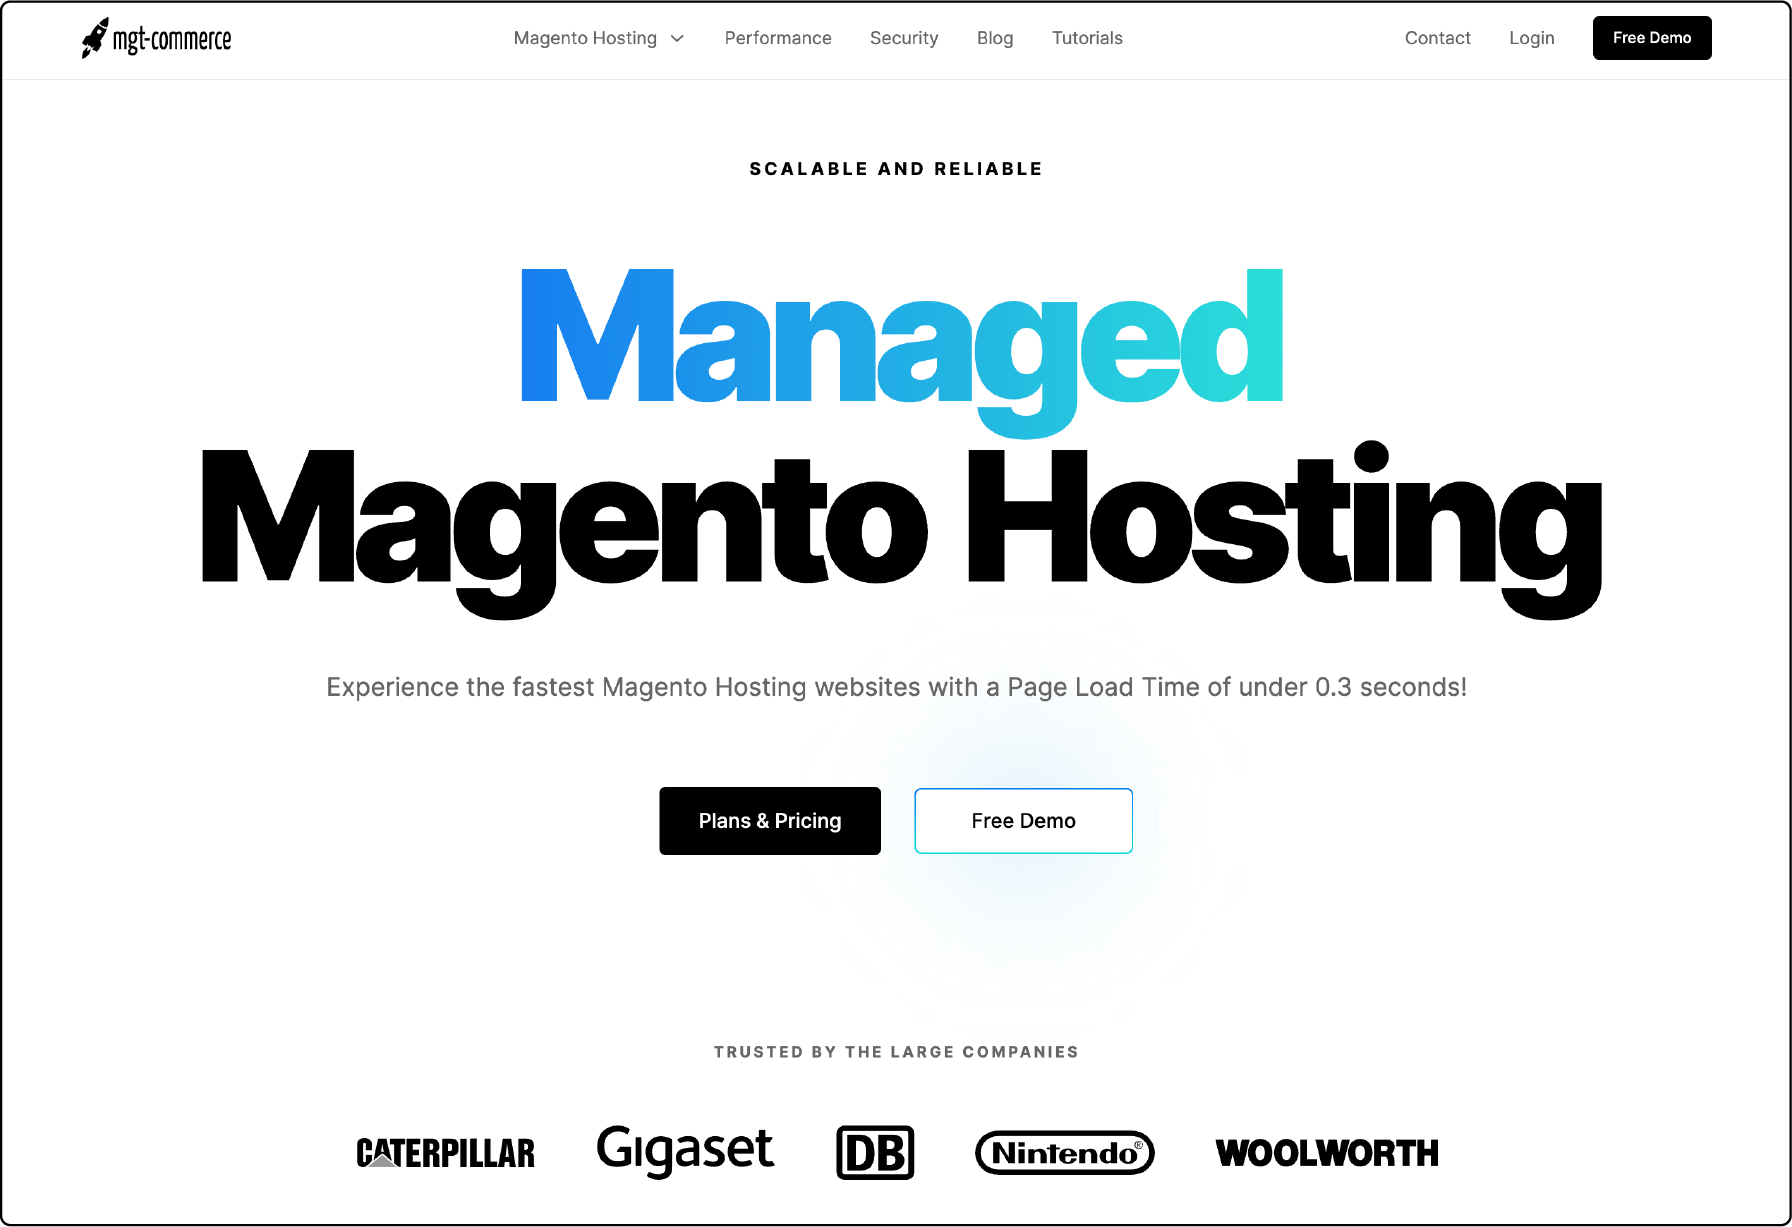 Overview of Magento hosting services